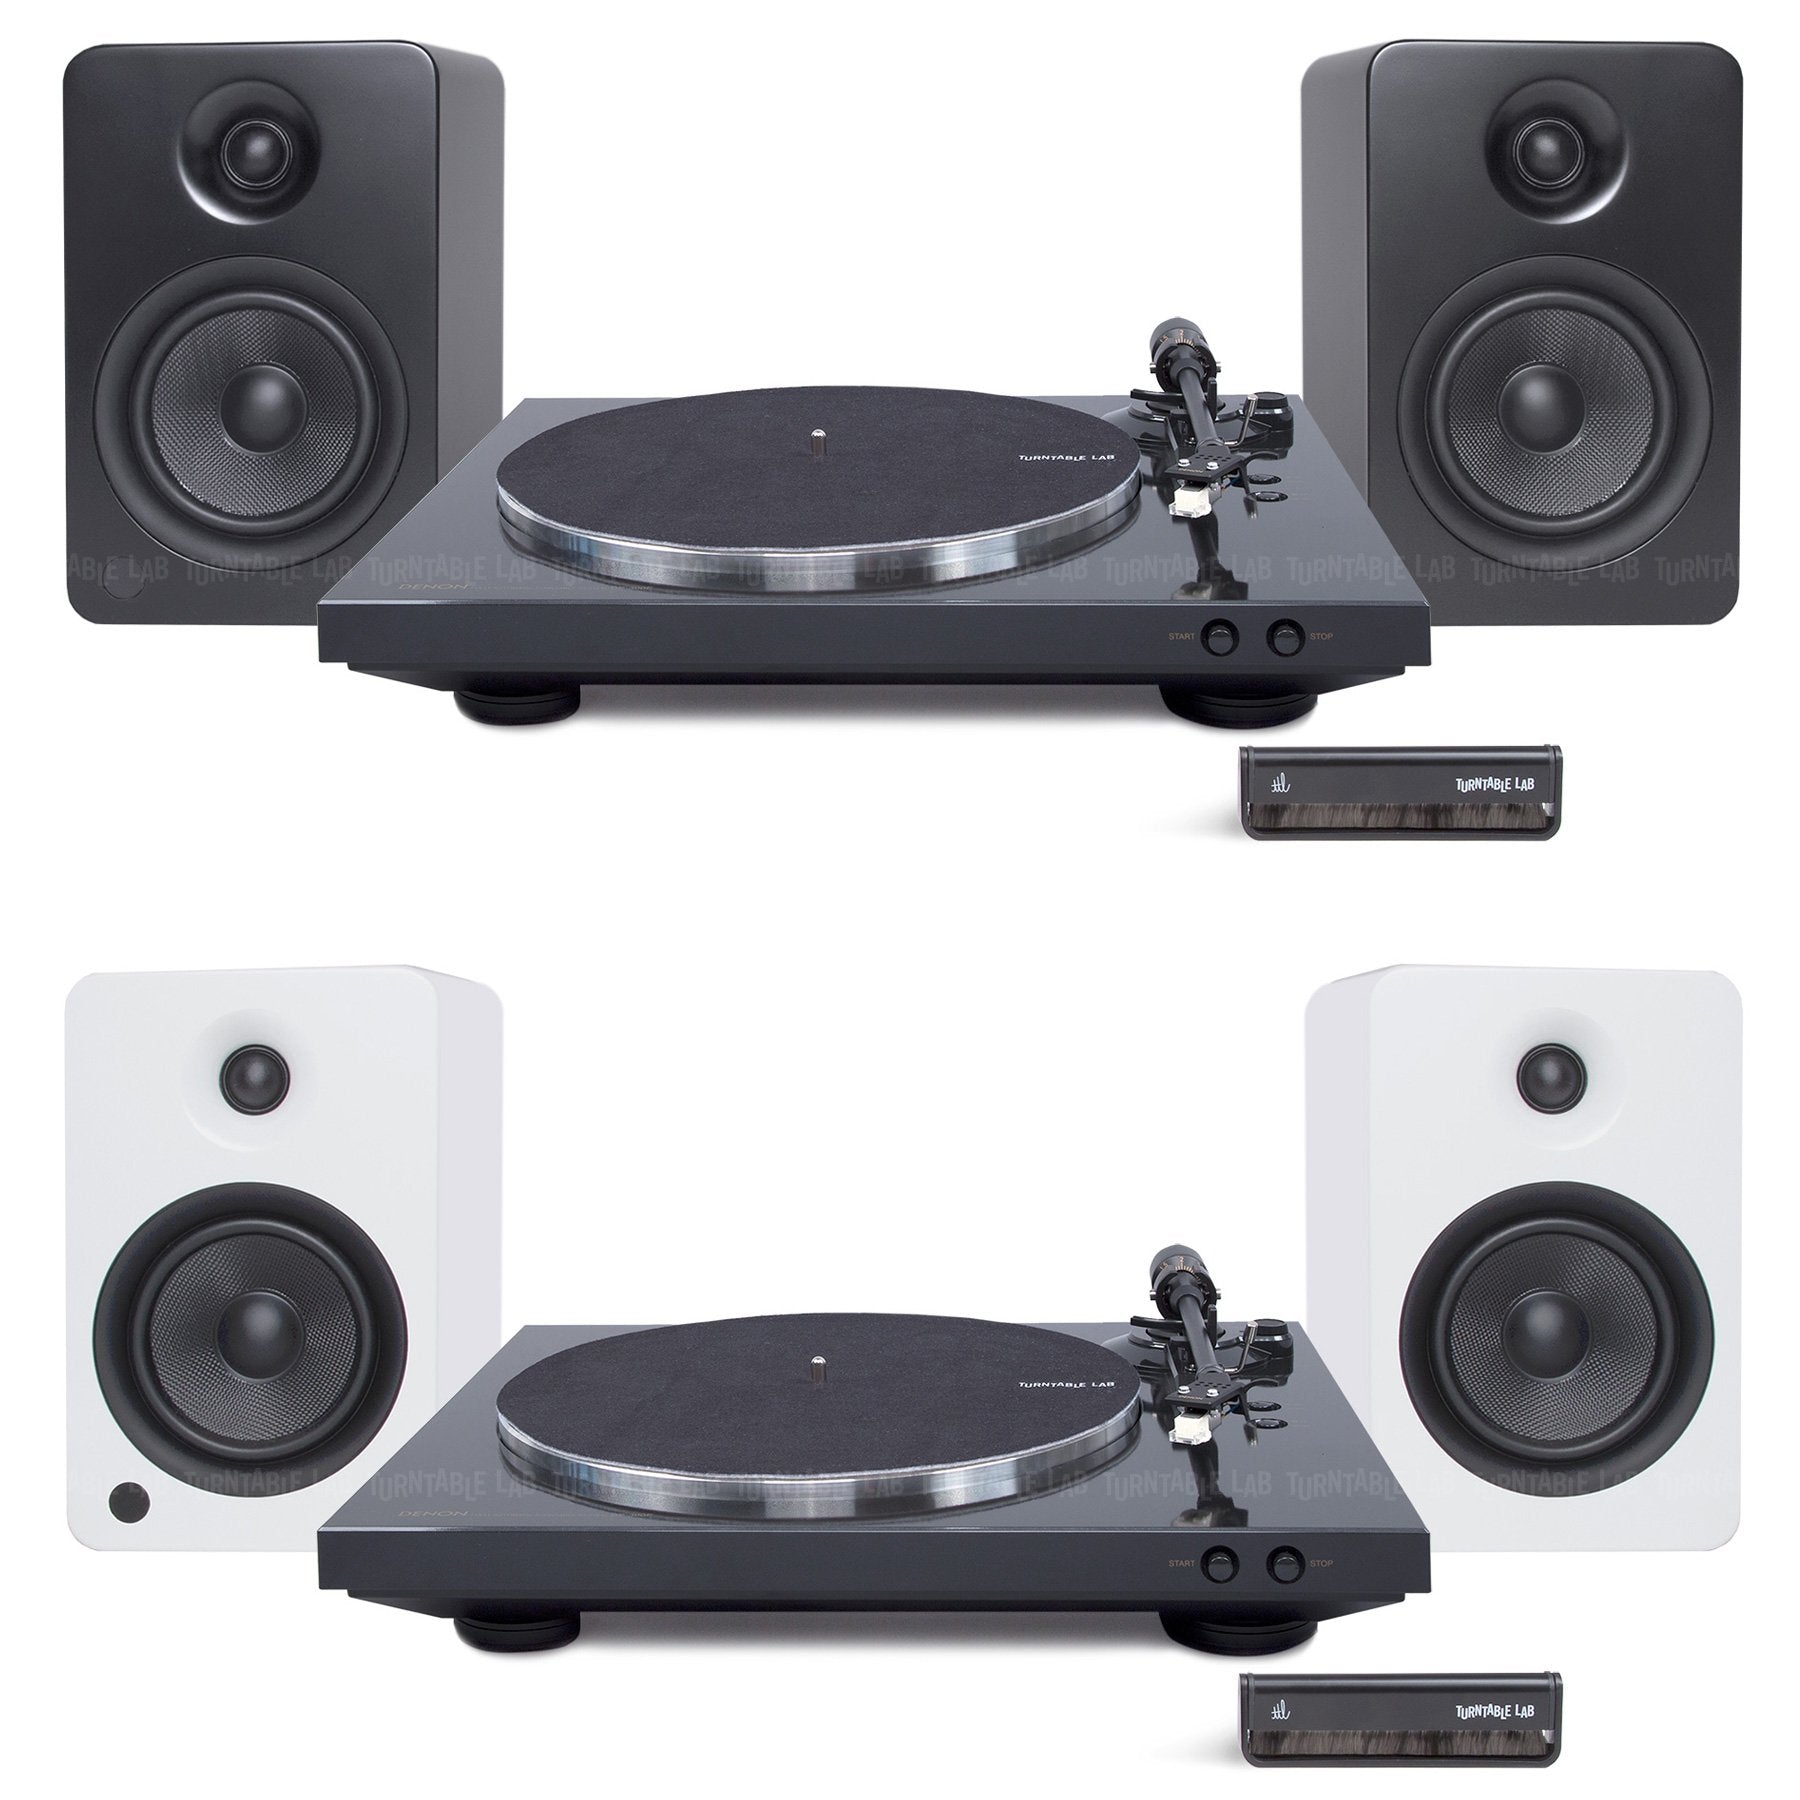 Denon: DP-300F / Kanto YU6 / Turntable Package